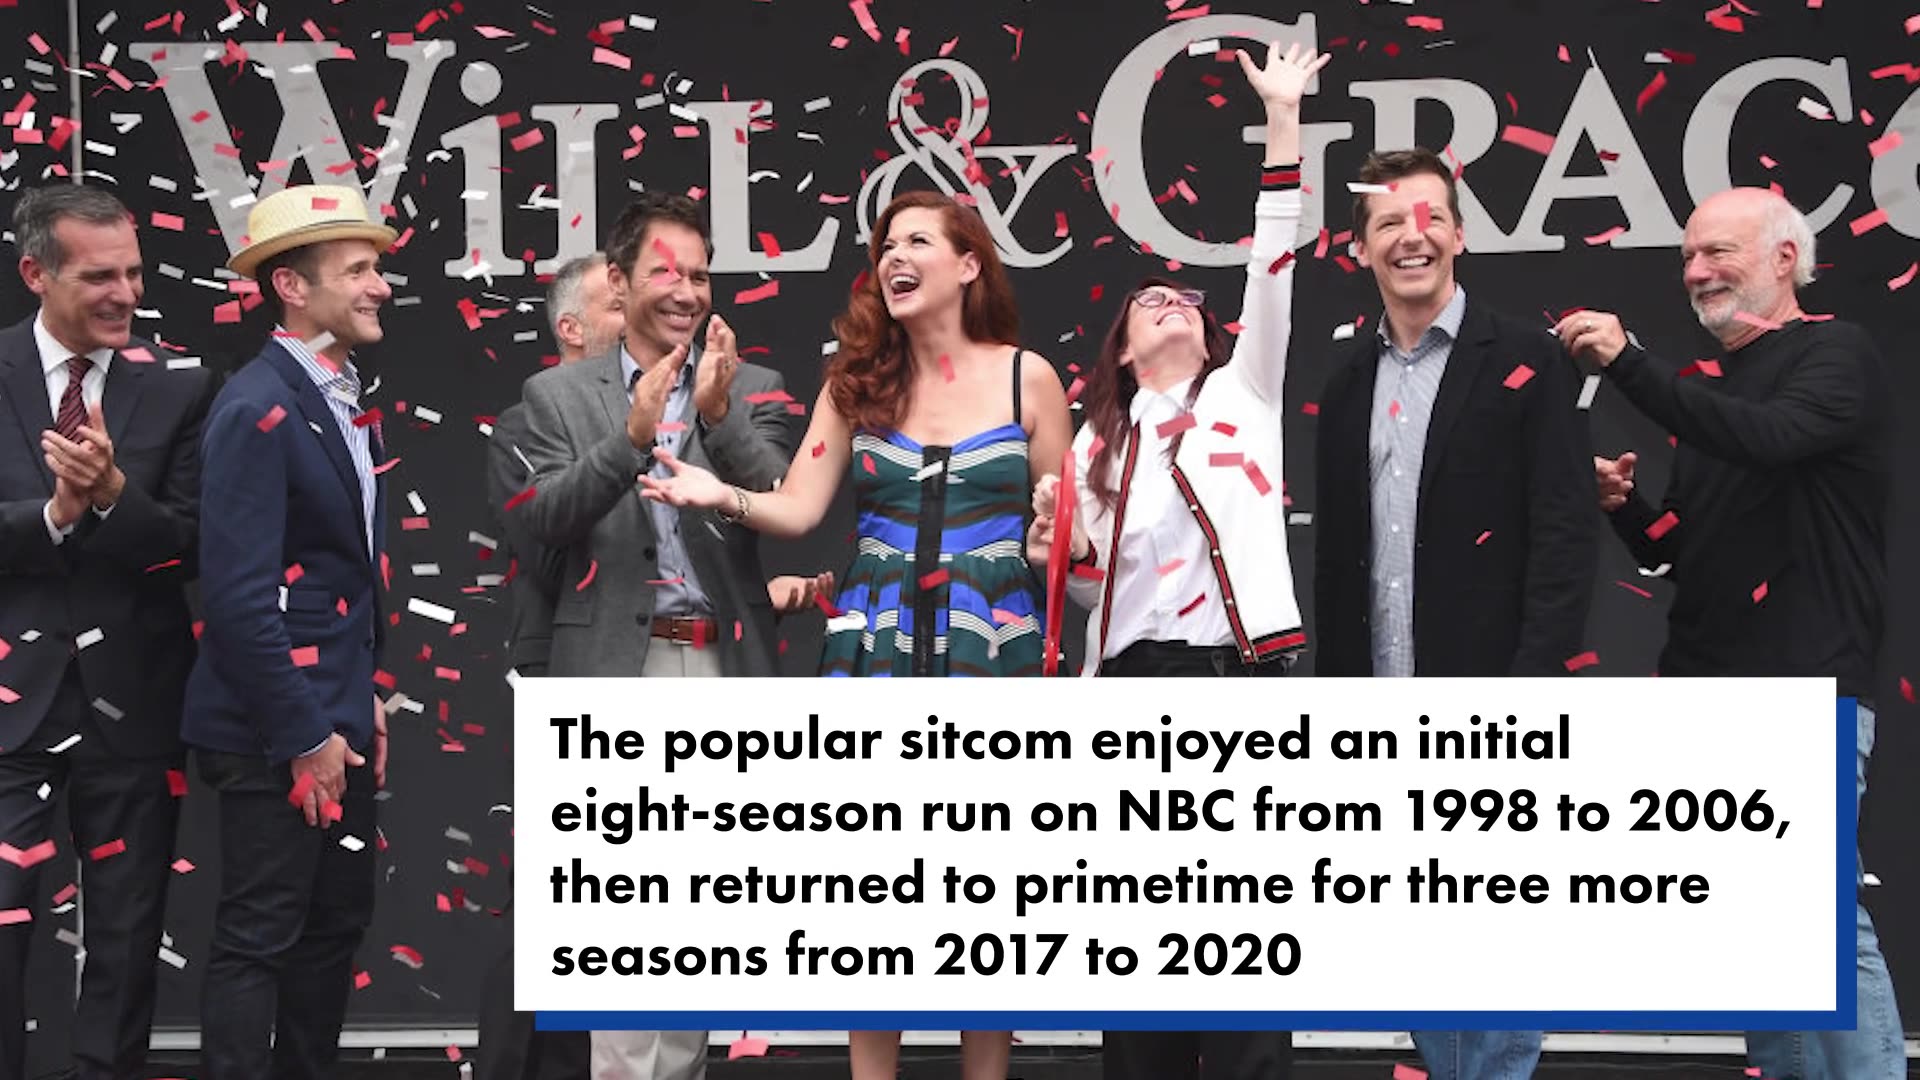 Debra Messing: NBC president wanted me to have 'bigger' boobs on 'Will & Grace'